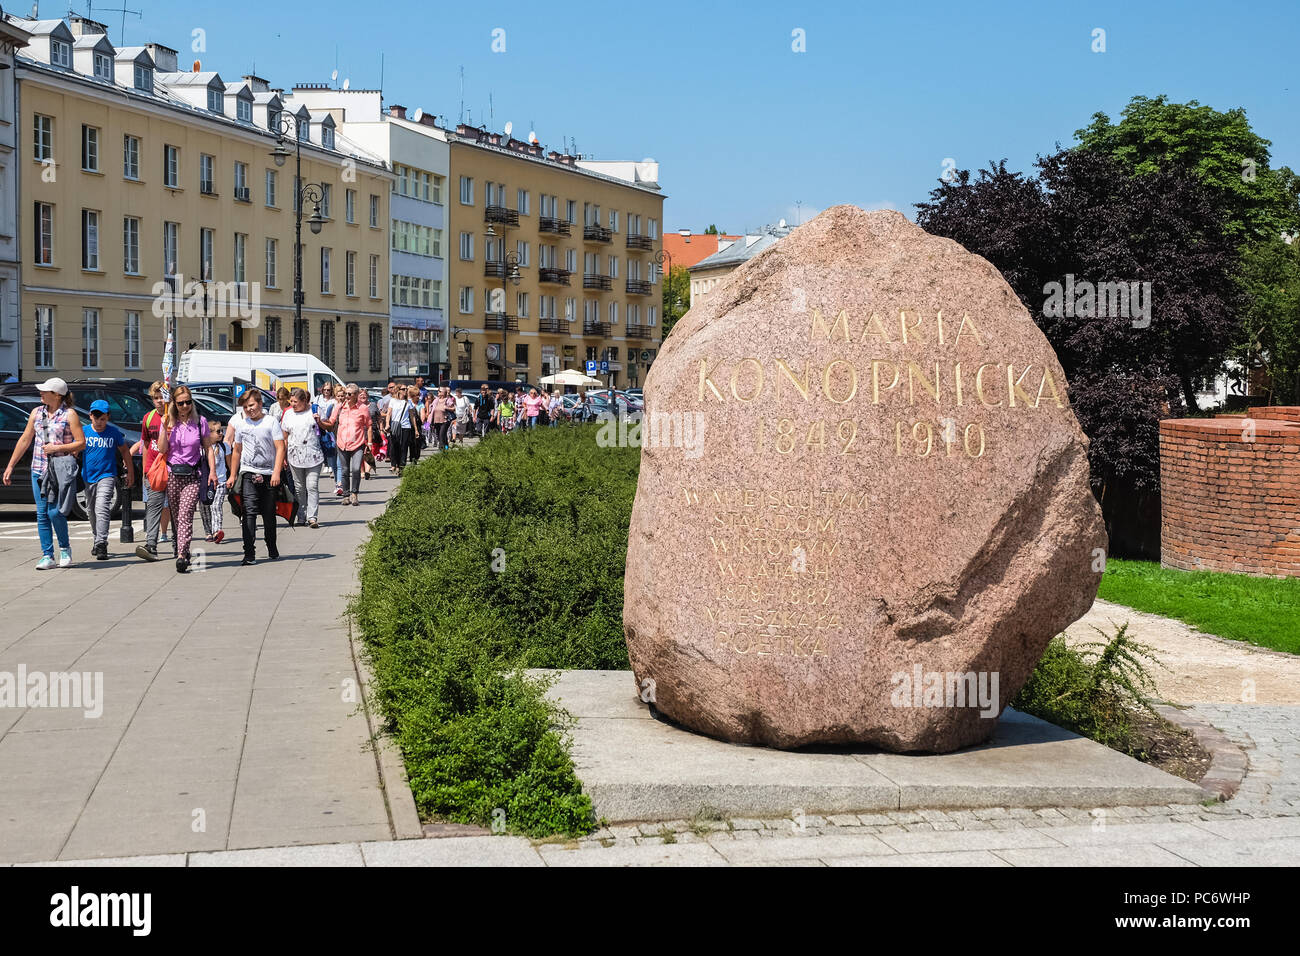 Warsaw, Poland - July 19, 2018: Grave stone to Maria Konotopnicka and group of people in an old town of Warsaw, Poland. Stock Photo